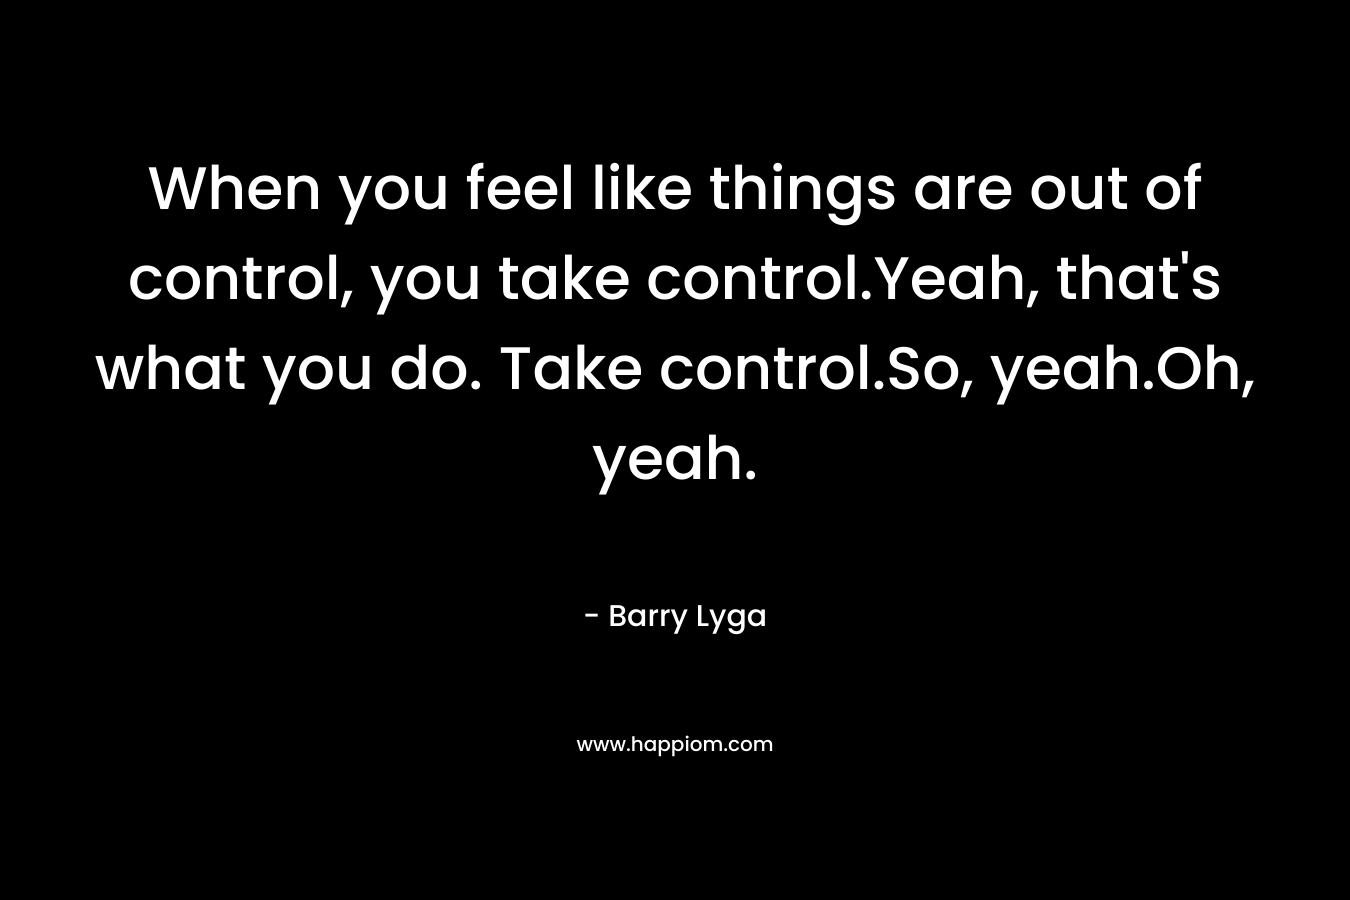 When you feel like things are out of control, you take control.Yeah, that's what you do. Take control.So, yeah.Oh, yeah.